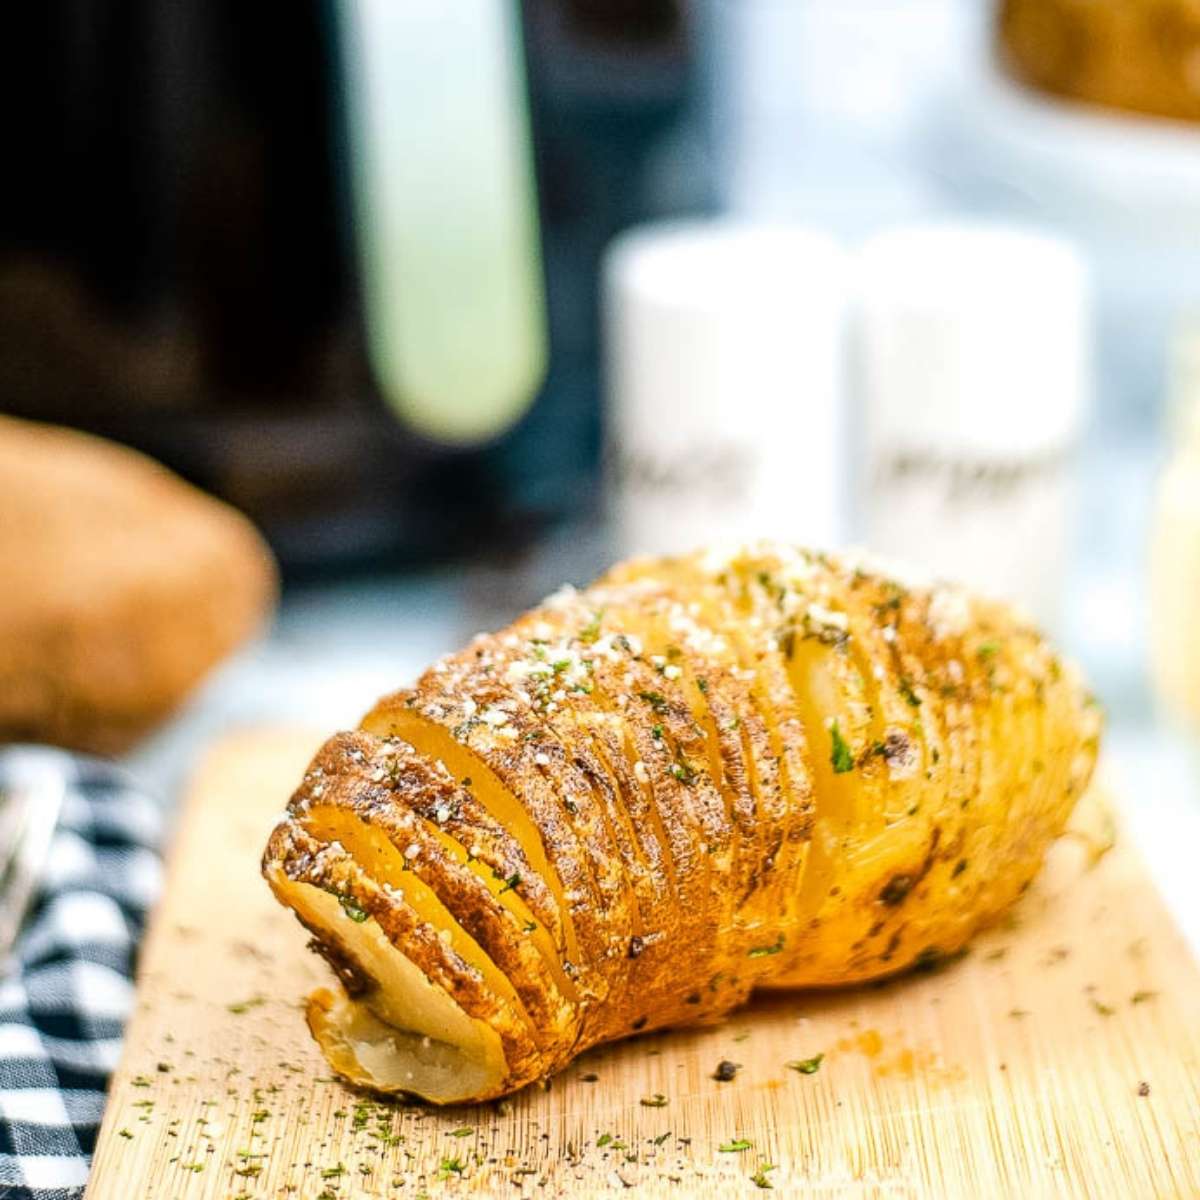 close up of an air fried Hasselback potato on a wooden cutting board.